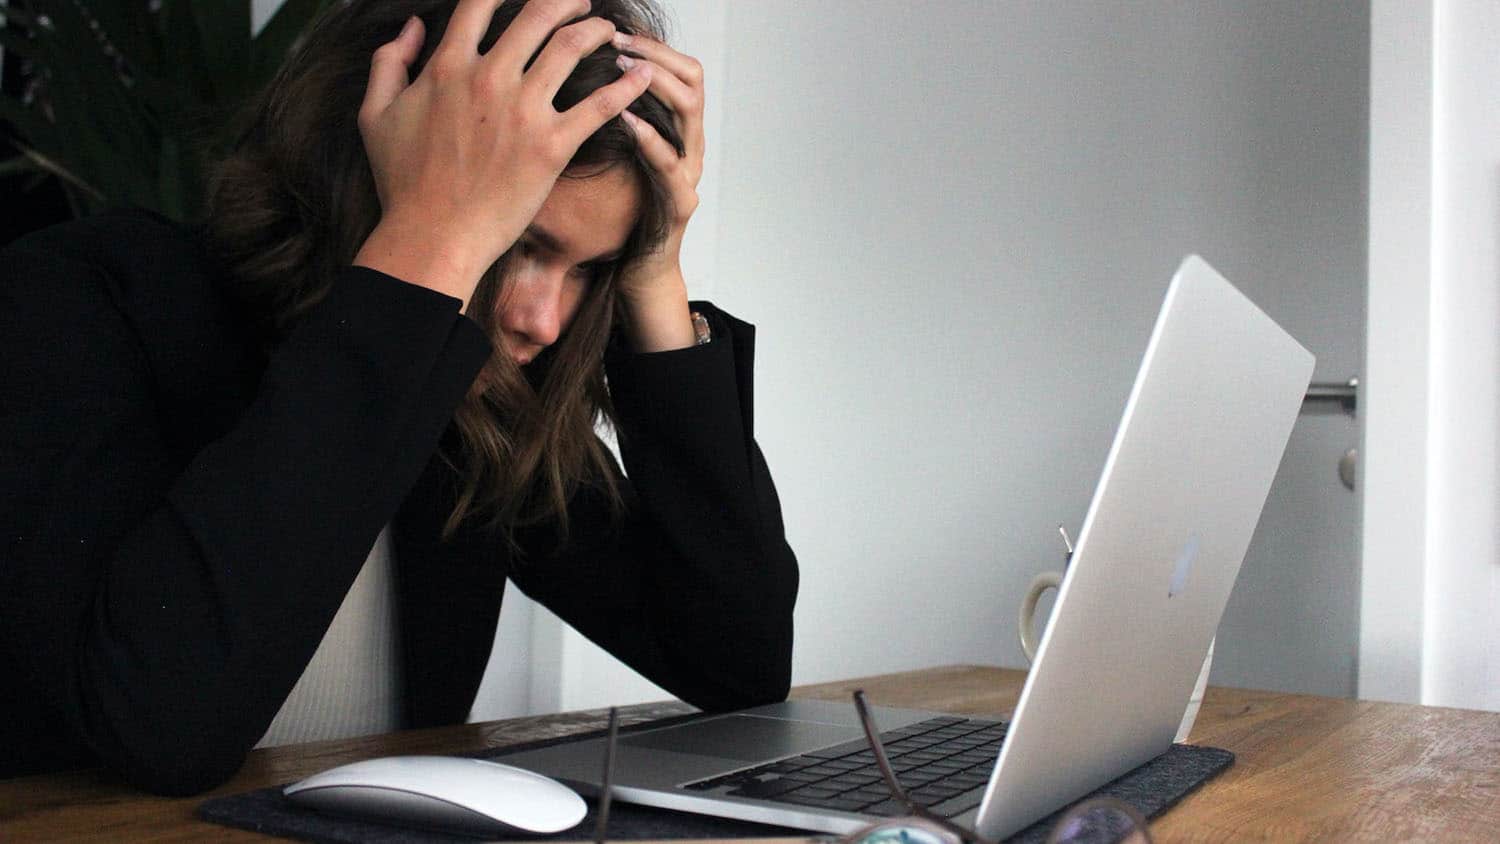 woman looking at laptop screen holds her head in her hands as if stressed